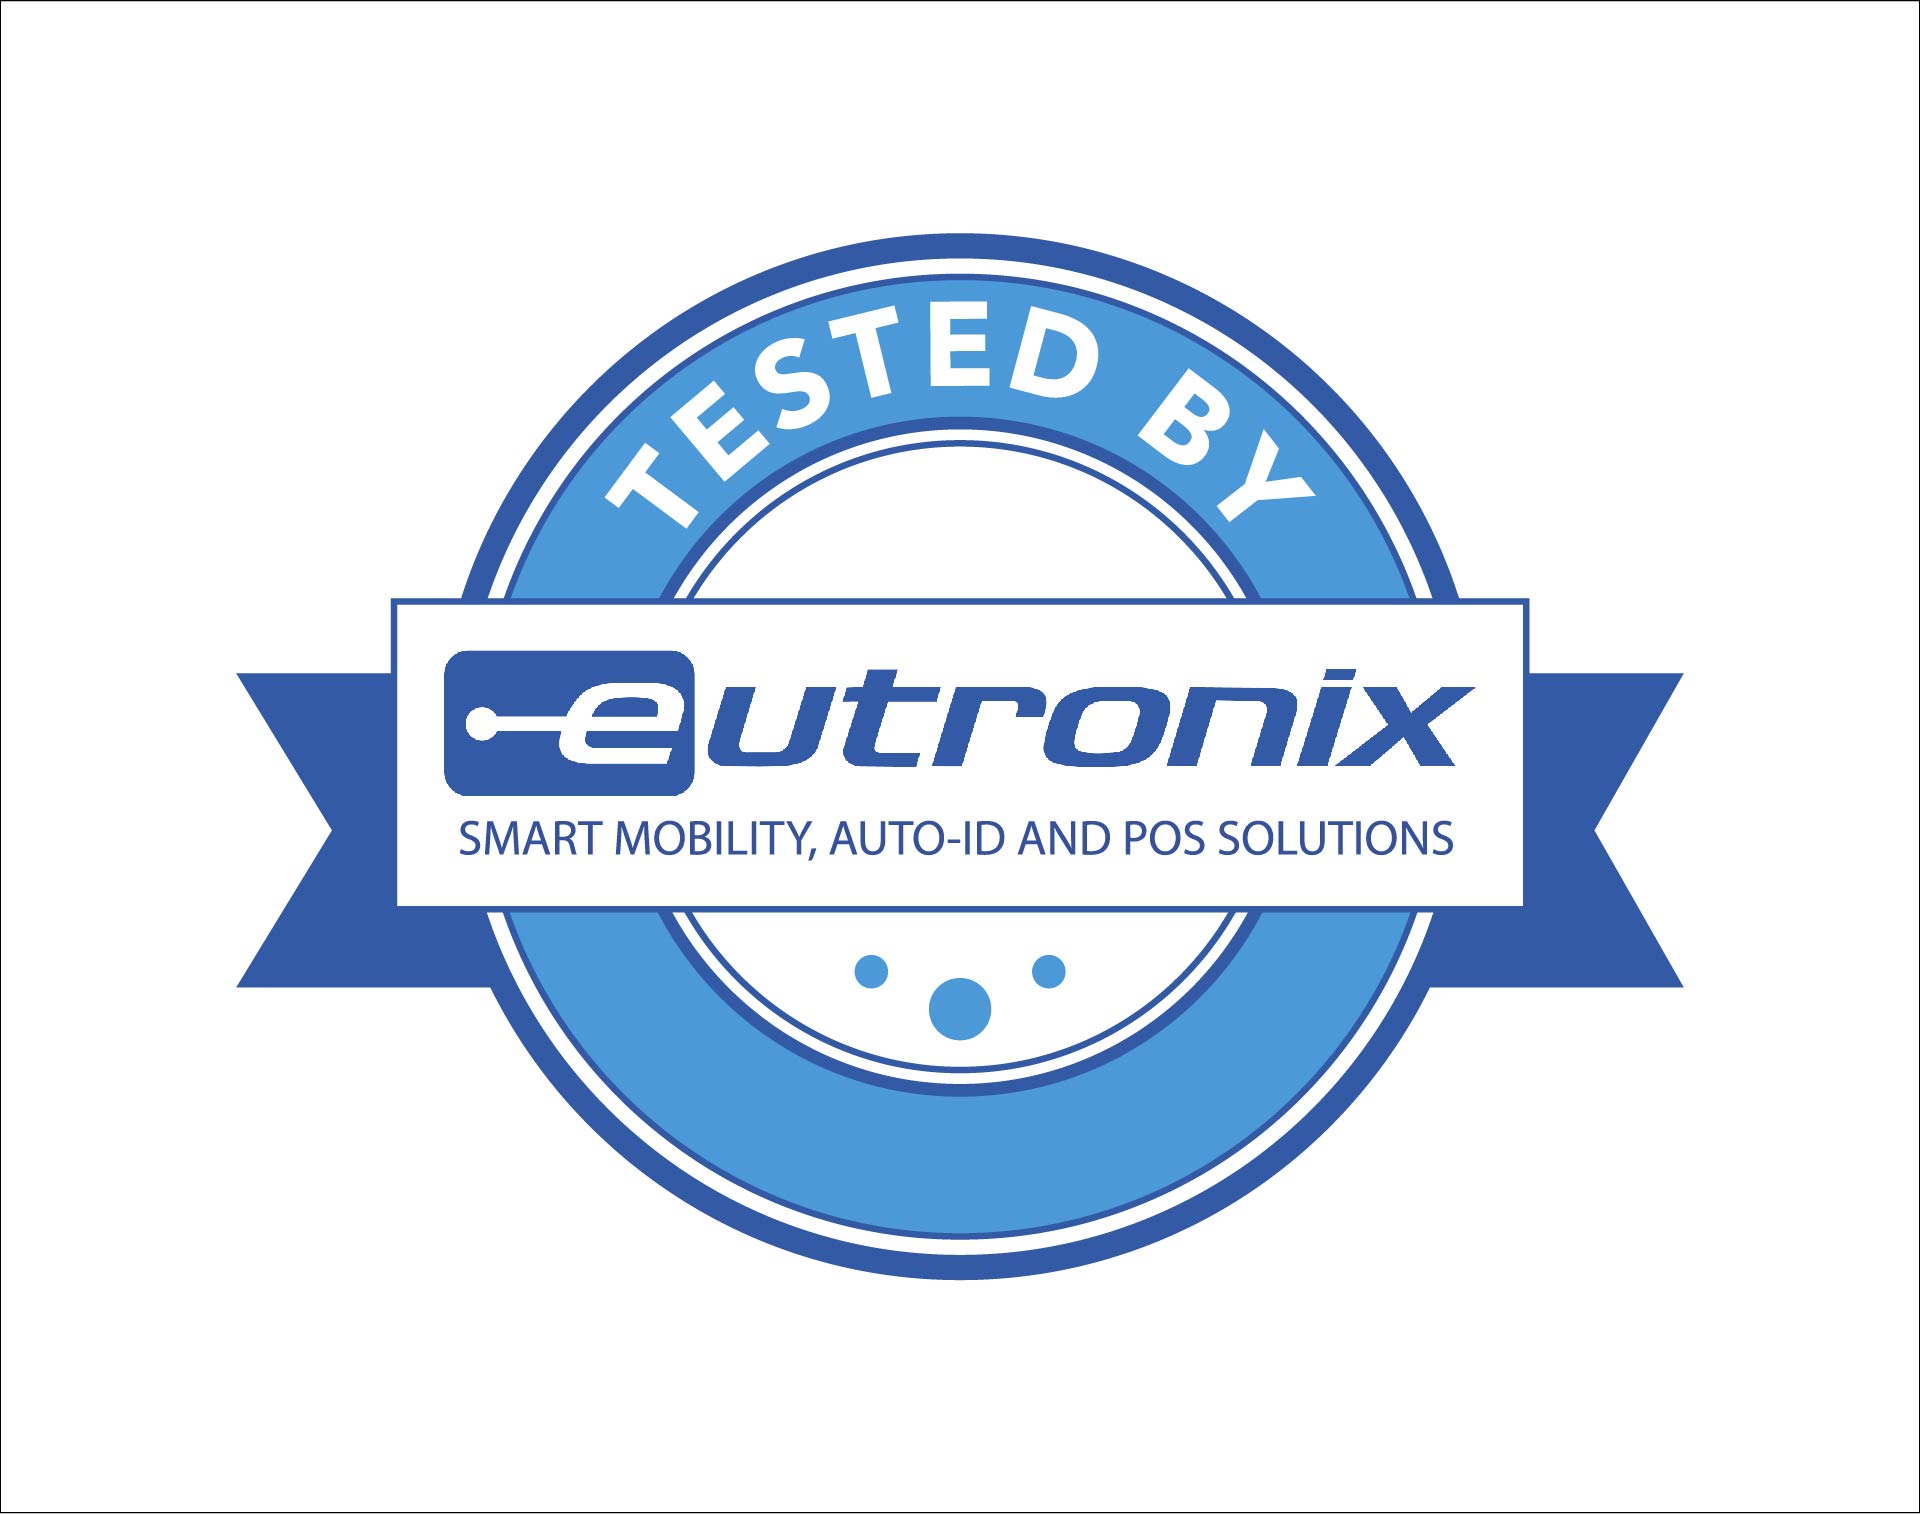 Tested by Eutronix